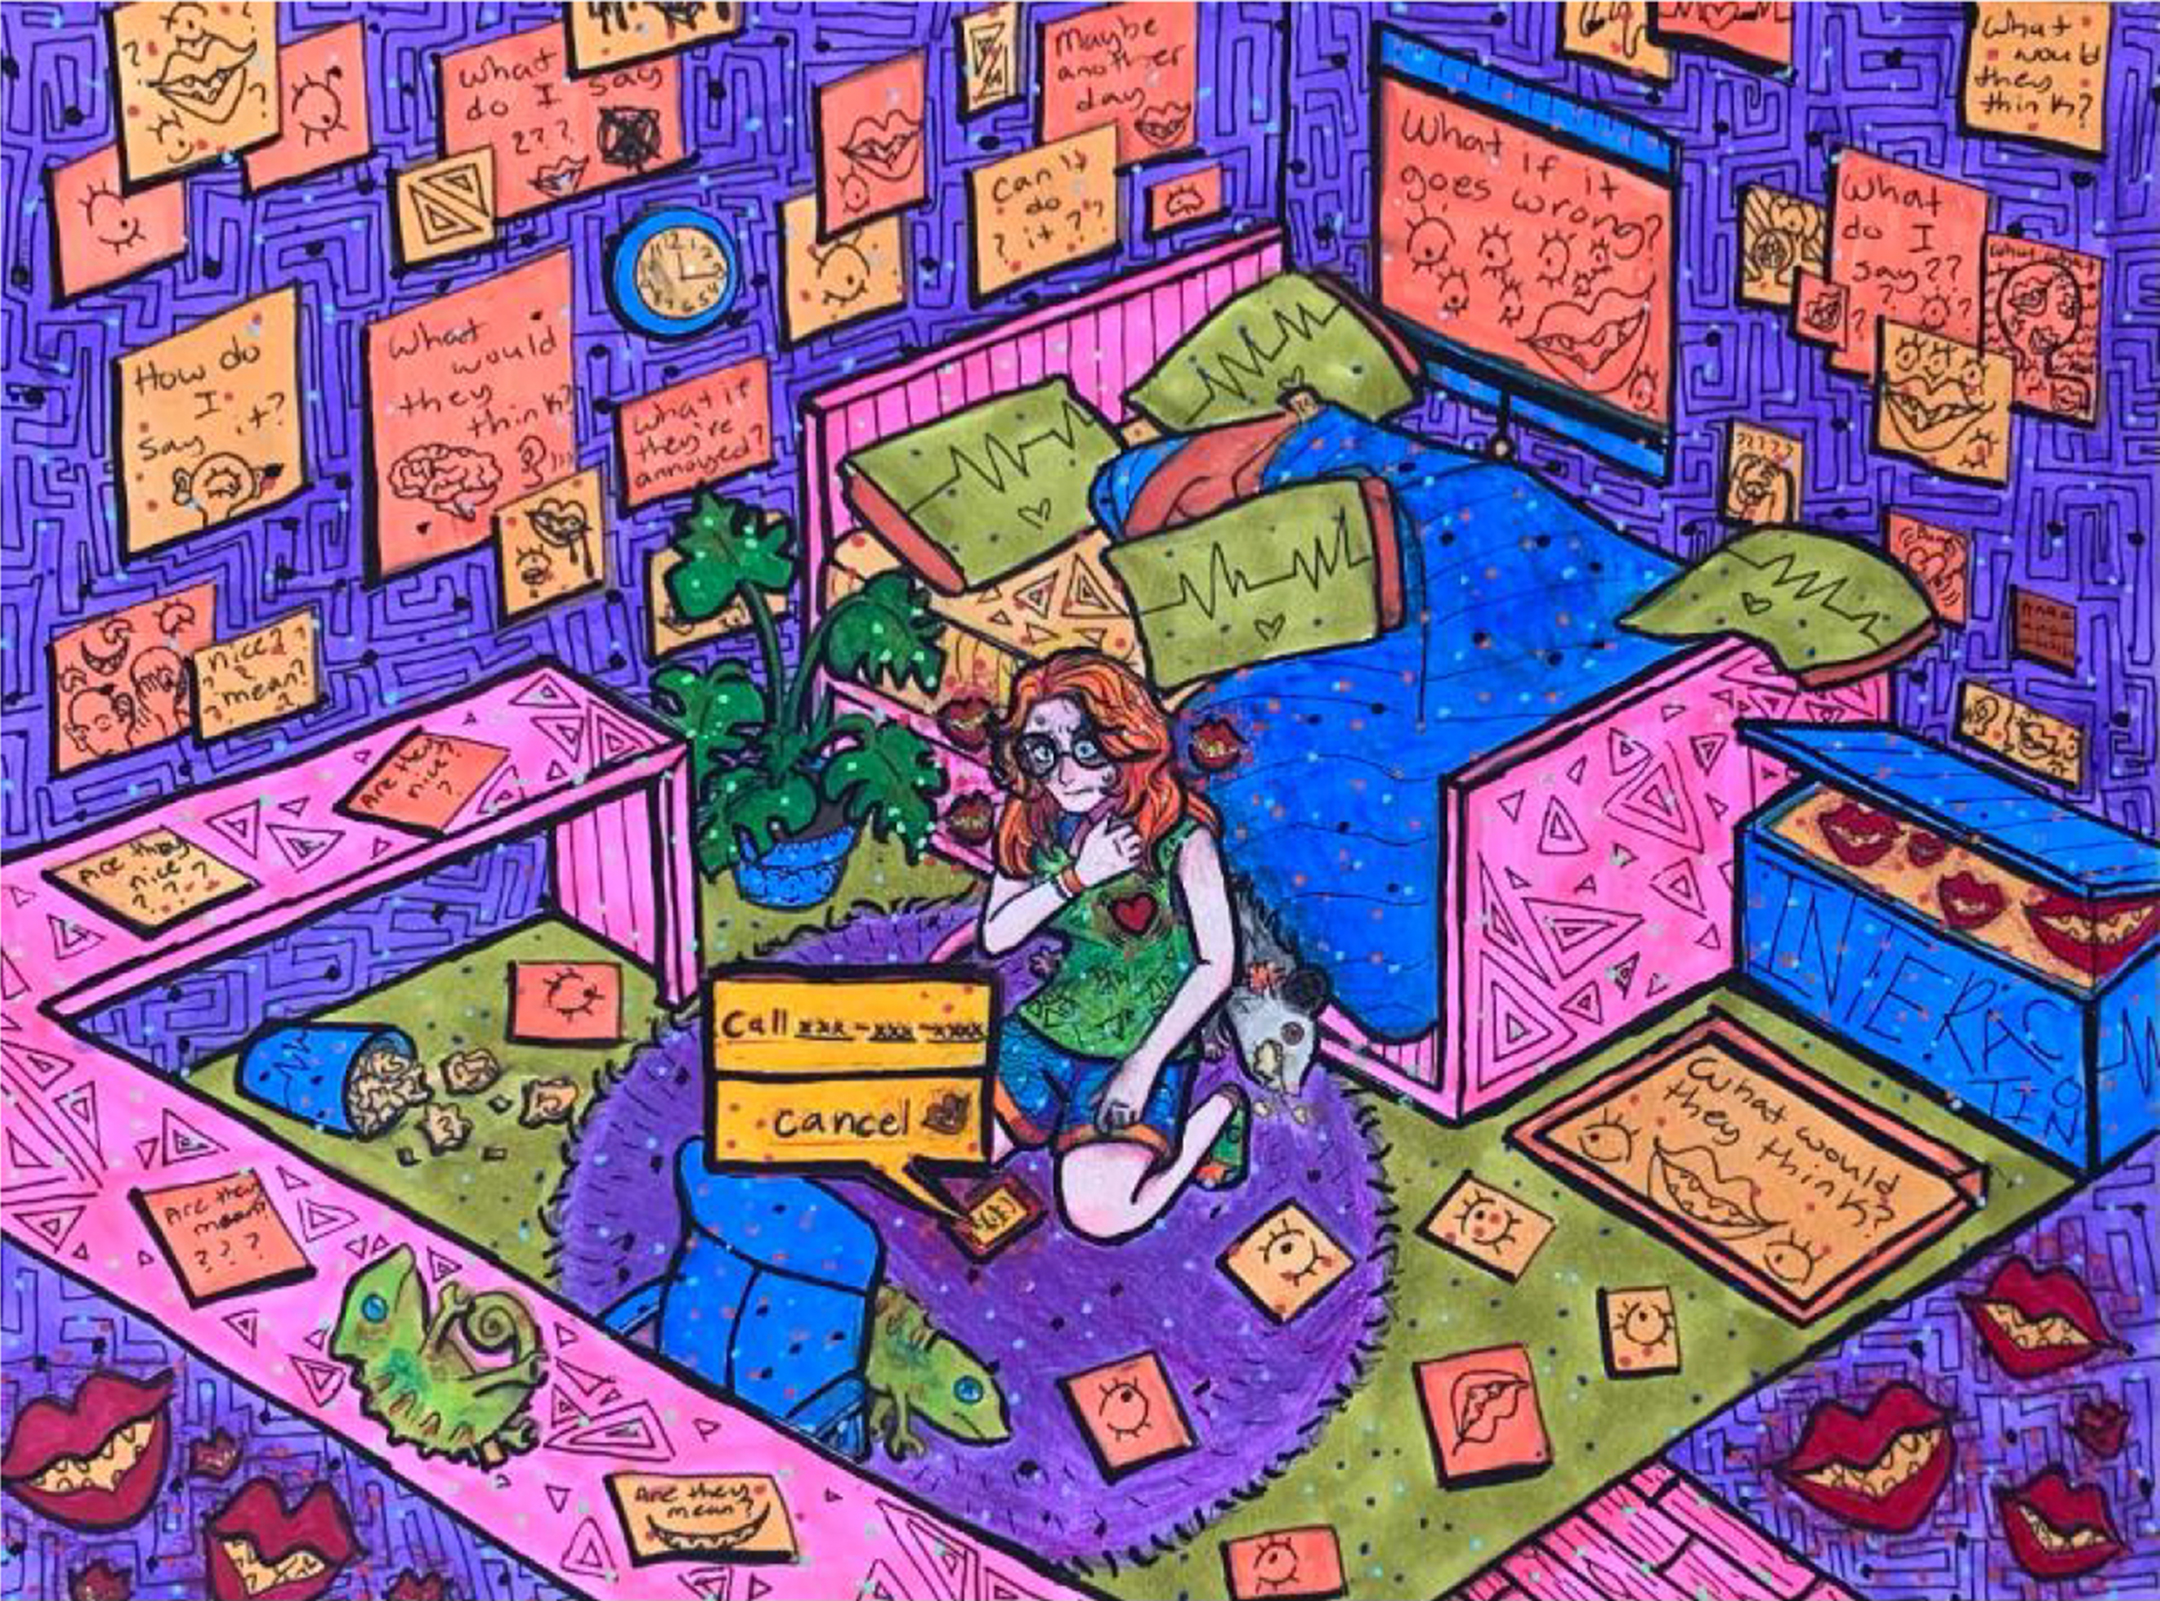 Cartoony, busy illustration depicting a young woman kneeling on the floor of a room with walls covered in questions and aphorisms